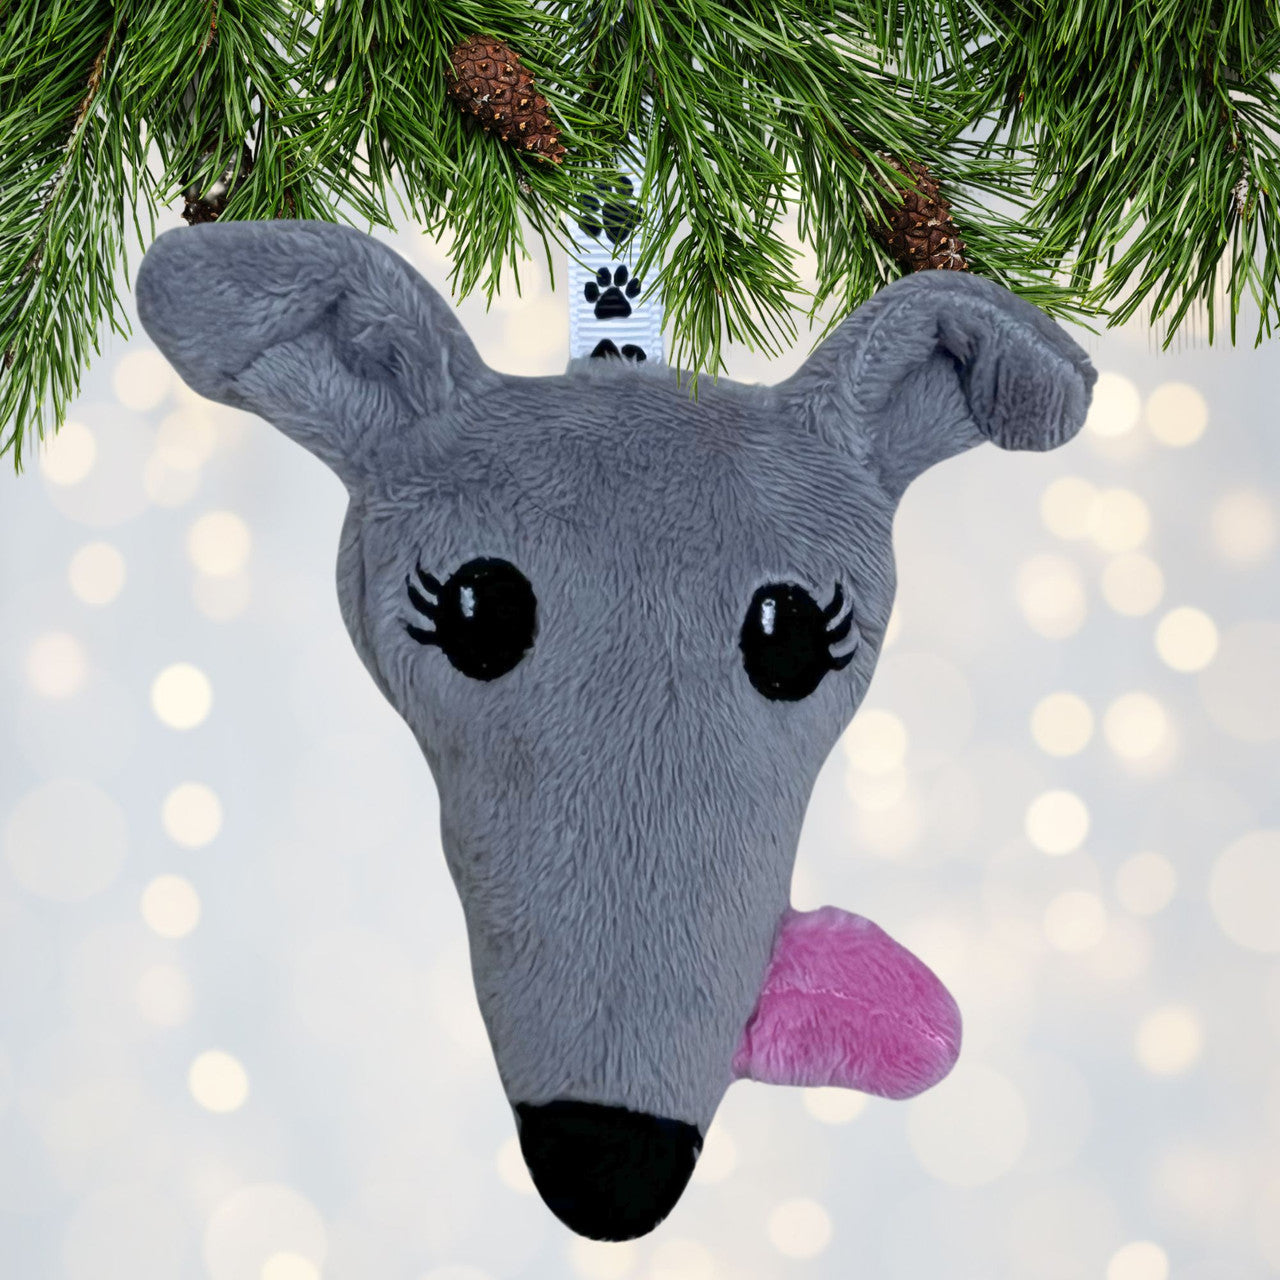 Houndie Head Ornament Silver with Eyelashes, Tongue